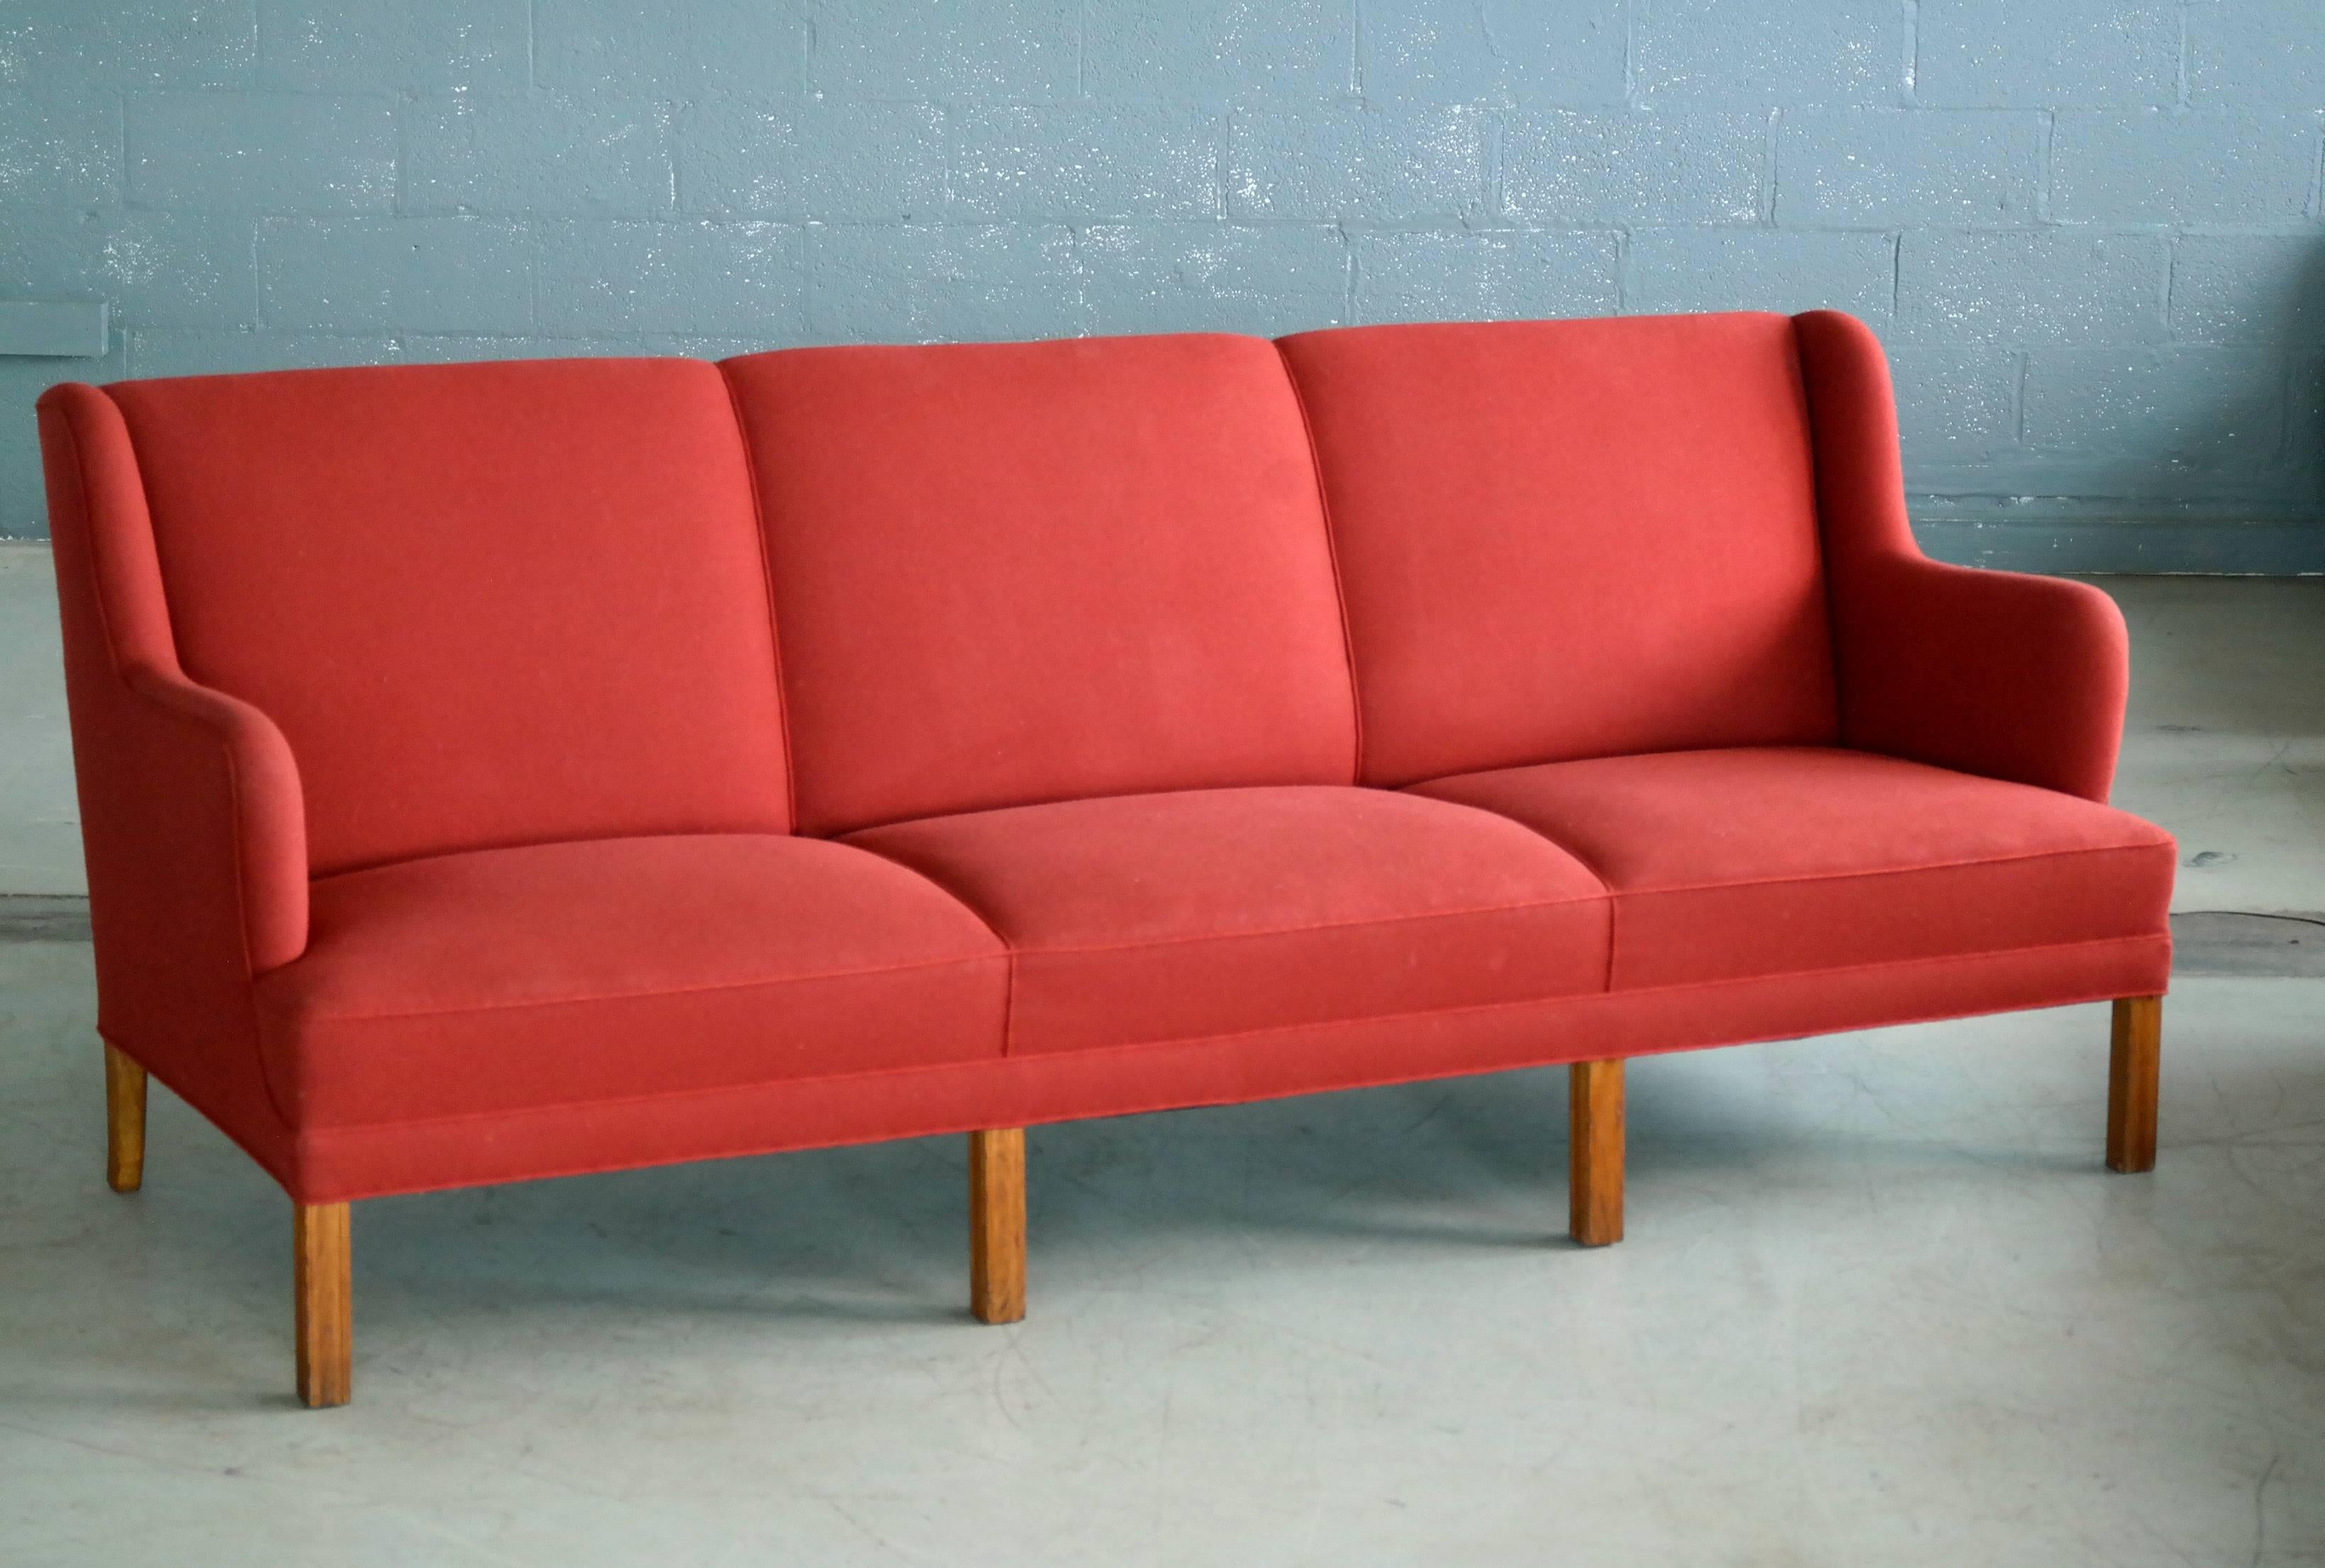 This very elegant and generously sized three-seat sofa was designed and made by the Danish Master Cabinetmaker, Frits Henningsen, circa 1950. Henningsen was a Master Carpenter and Furniture maker and his furniture is increasingly sought after. This